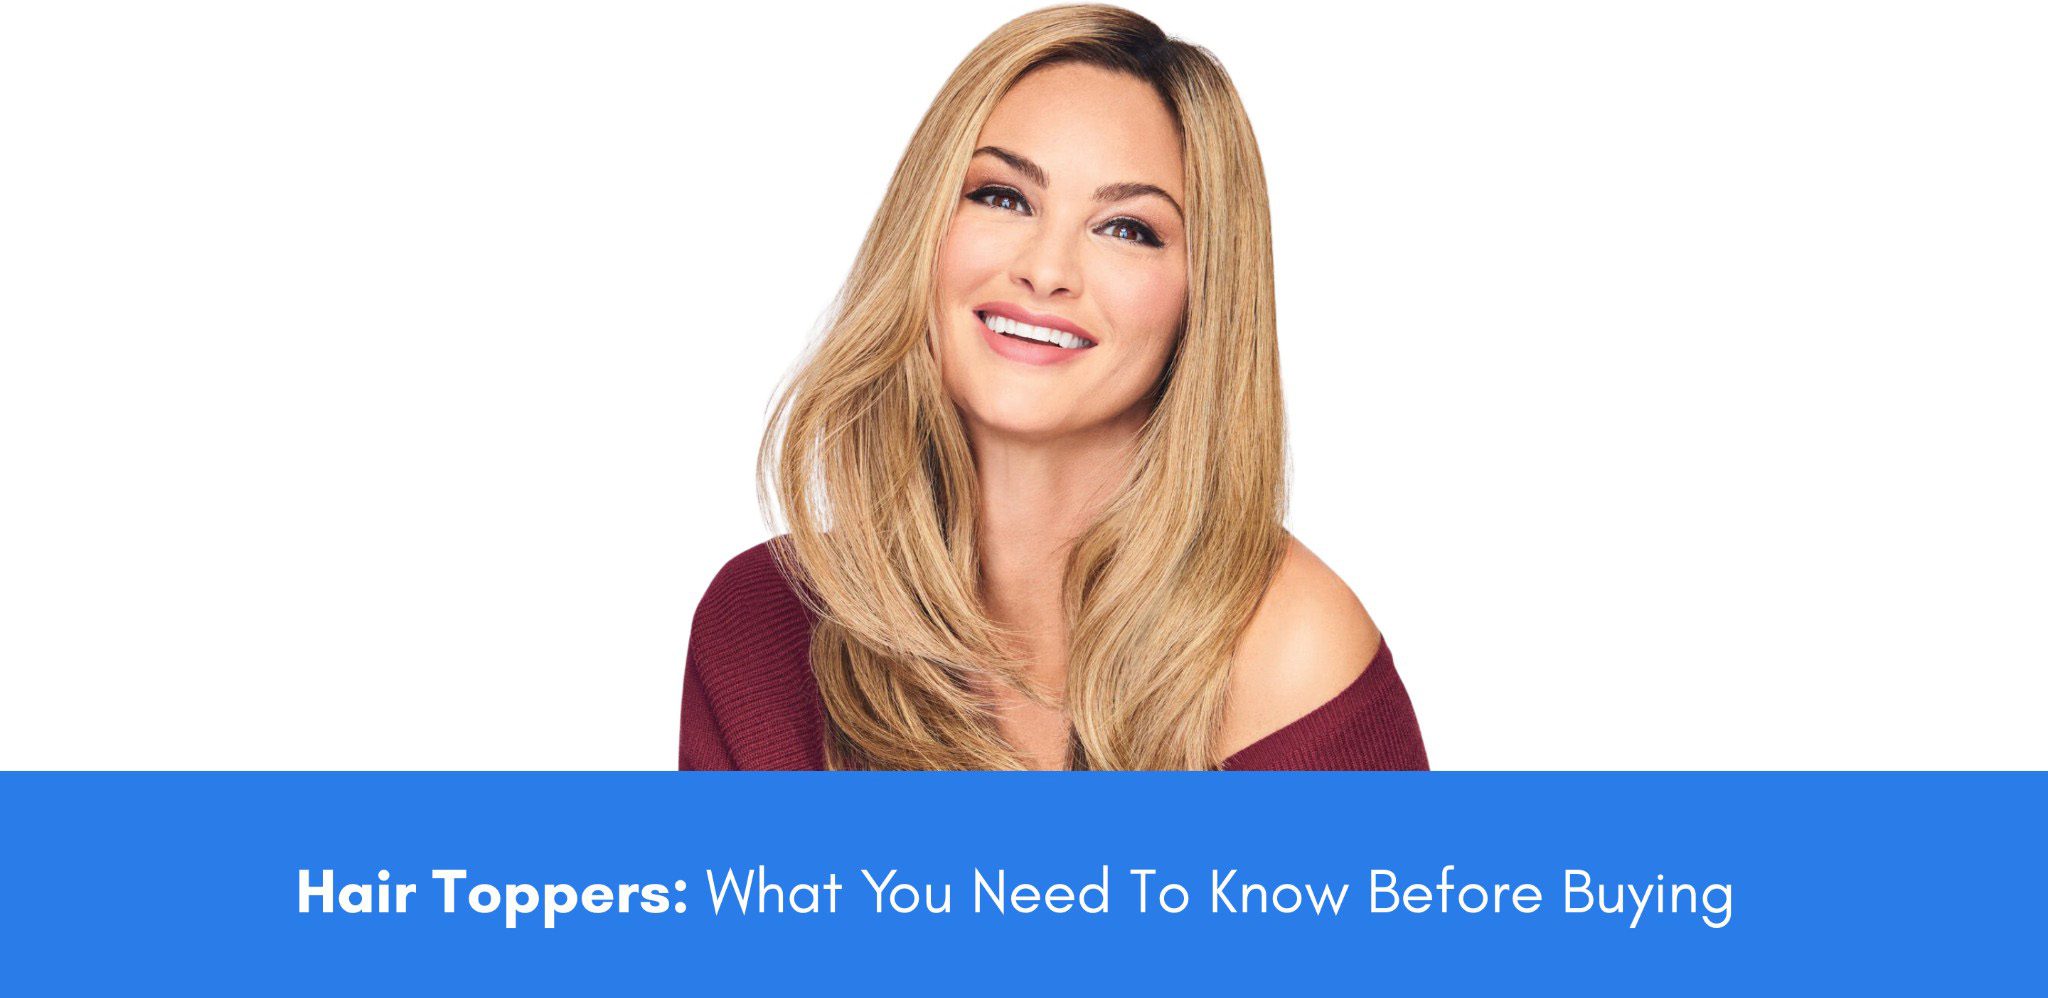 Hair Toppers: What You Need To Know Before Buying